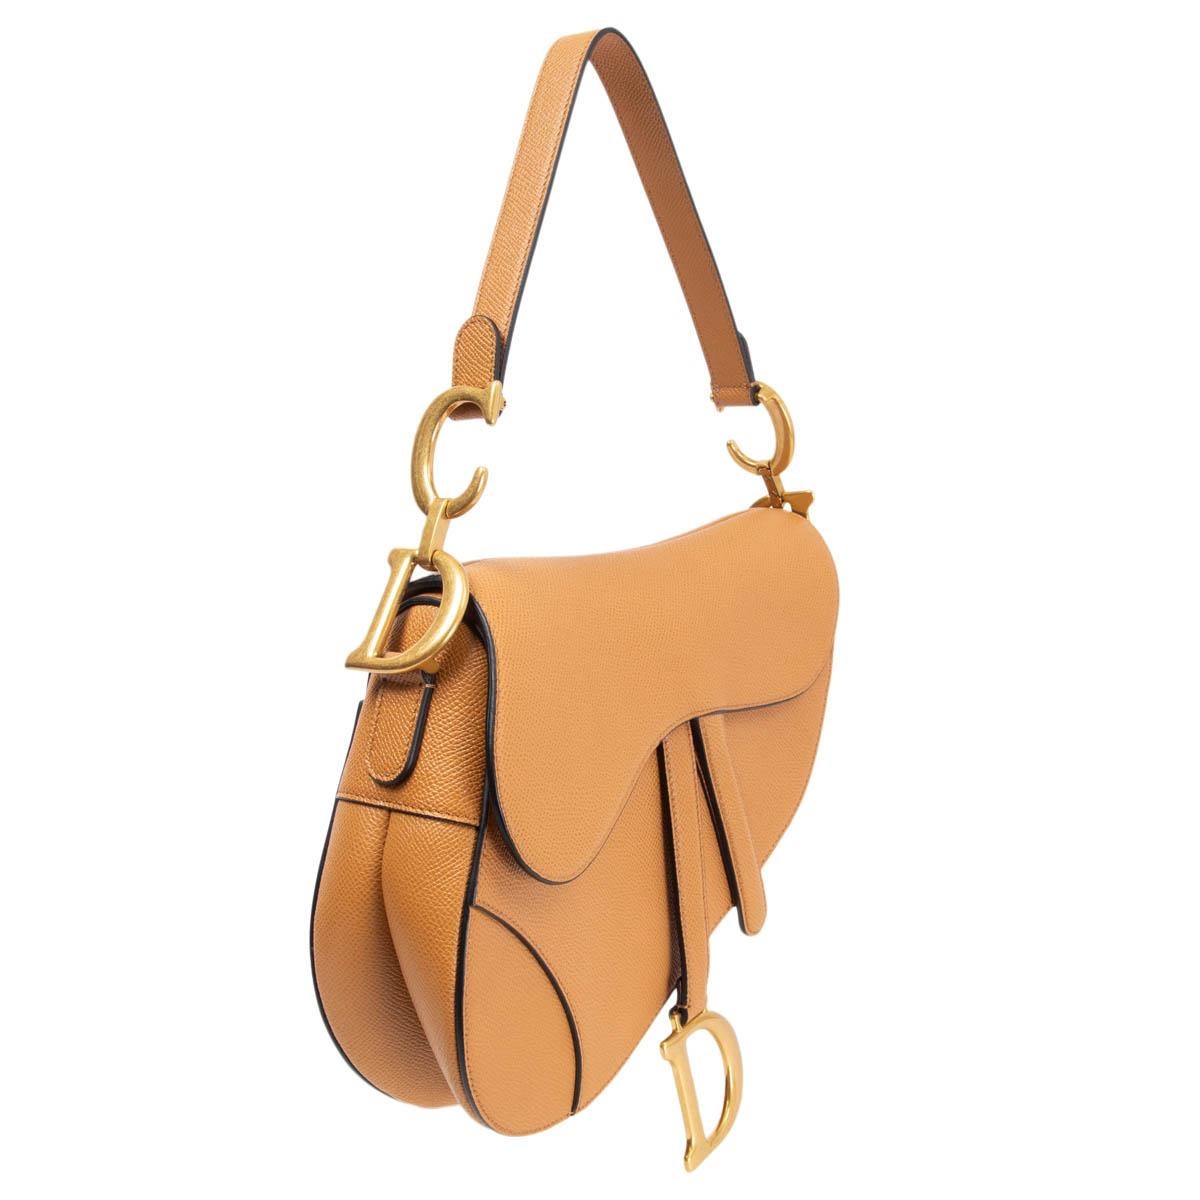 100% authentic Christian Dior Saddle bag in grained camel calfskin with gold-tone CD detail on the strap. The legendary design features a Saddle flap with a magnetic 'D' stirrup clasp, as well as an antique gold-finish metal 'CD' signature on either